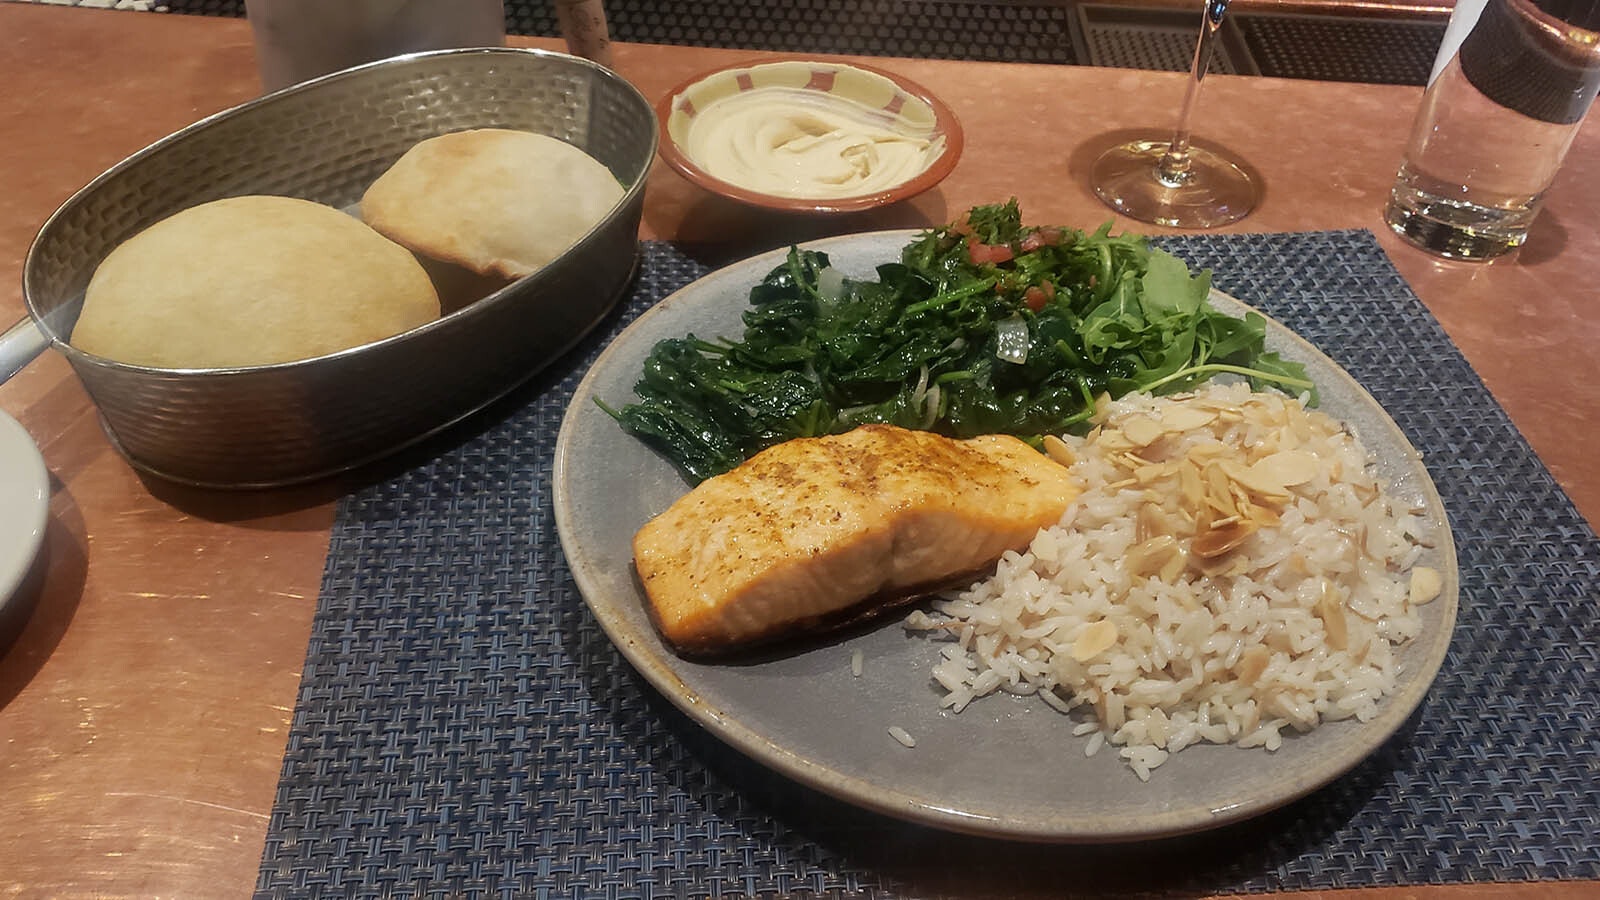 Salmon with greens and rice pilaf as well as delicious balloon bread and hummus.